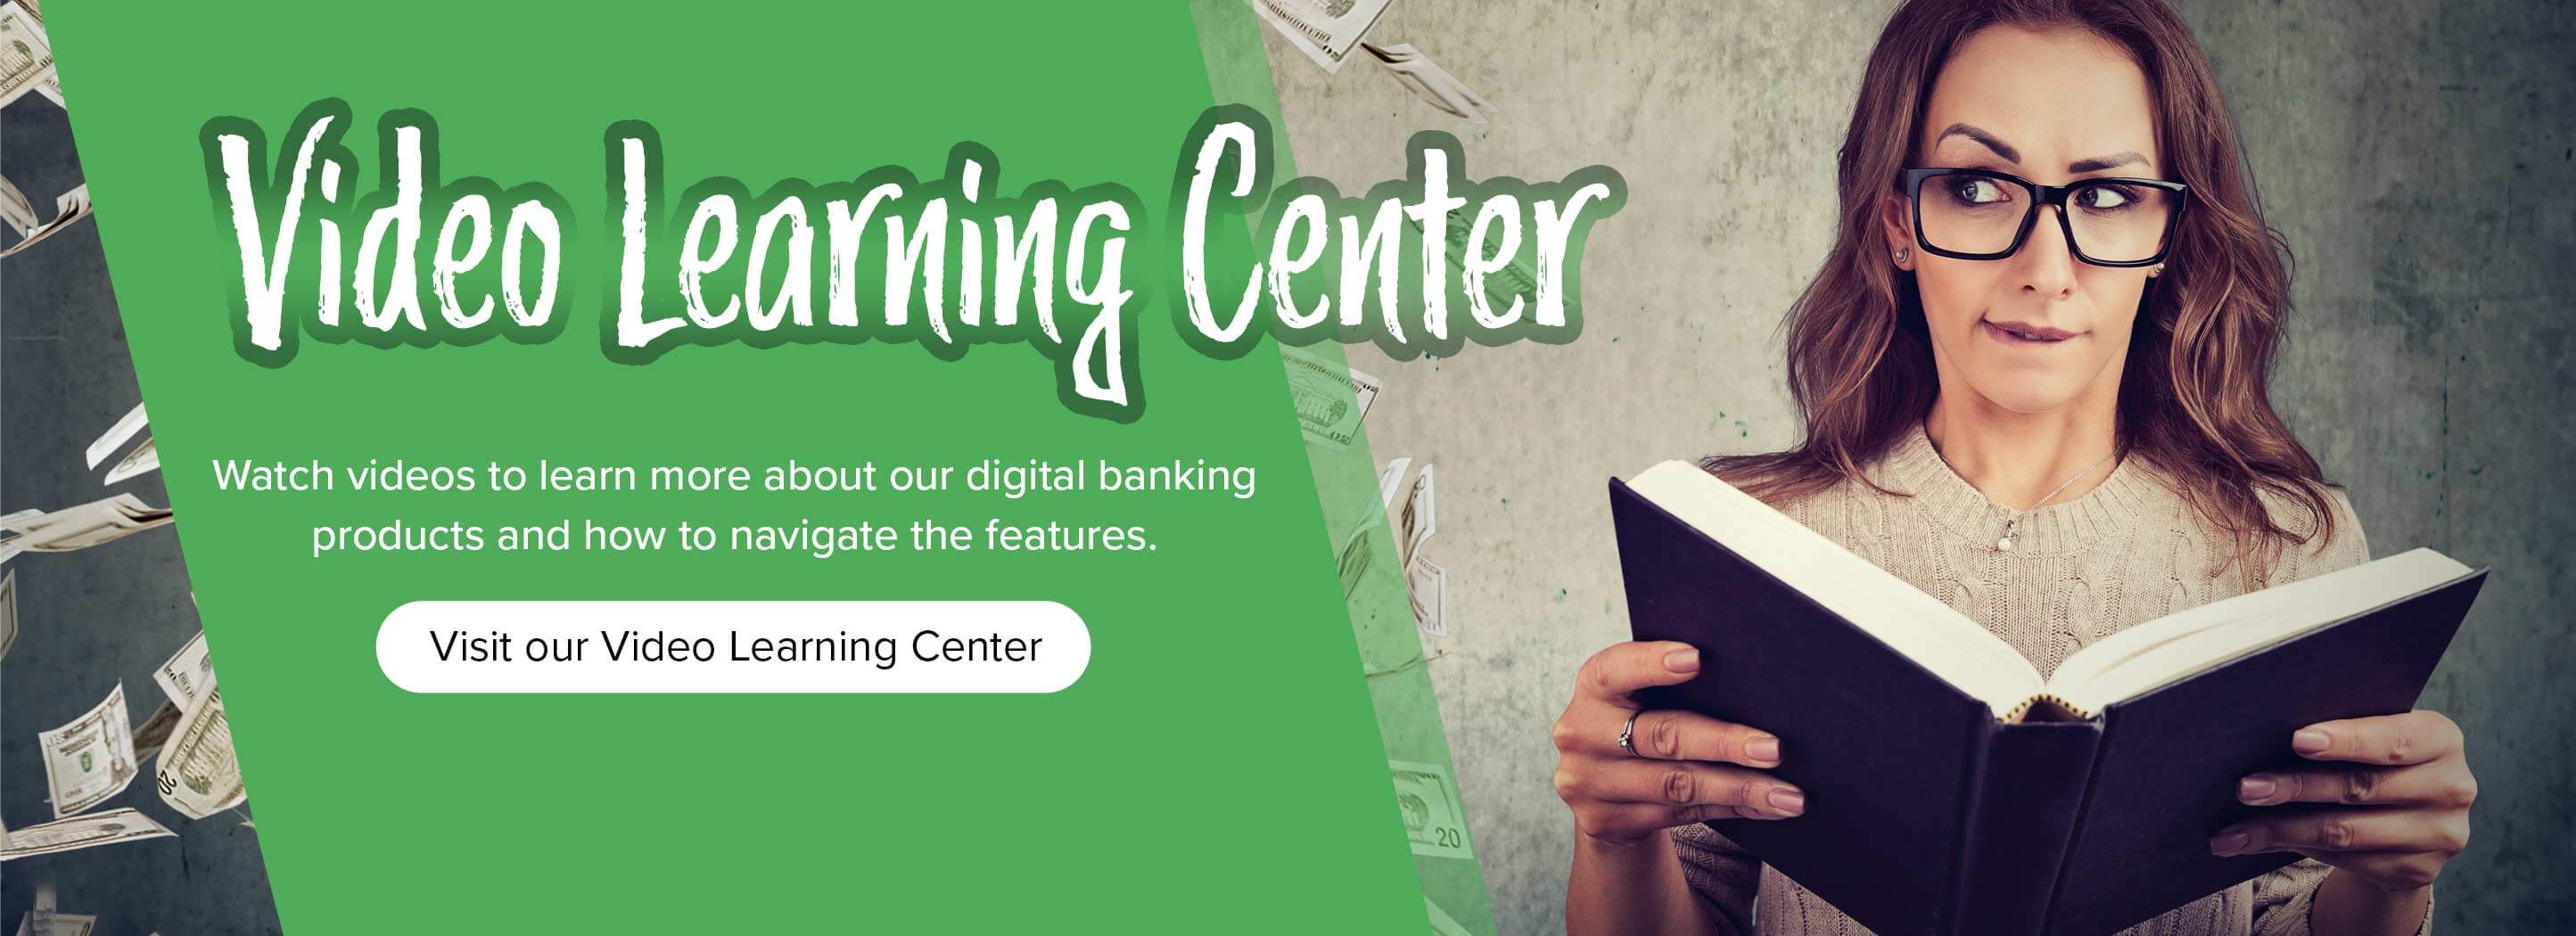 Video Learning Center Watch videos to learn more about our digital banking products and how to navigate the features. Visit our Video Learning Center